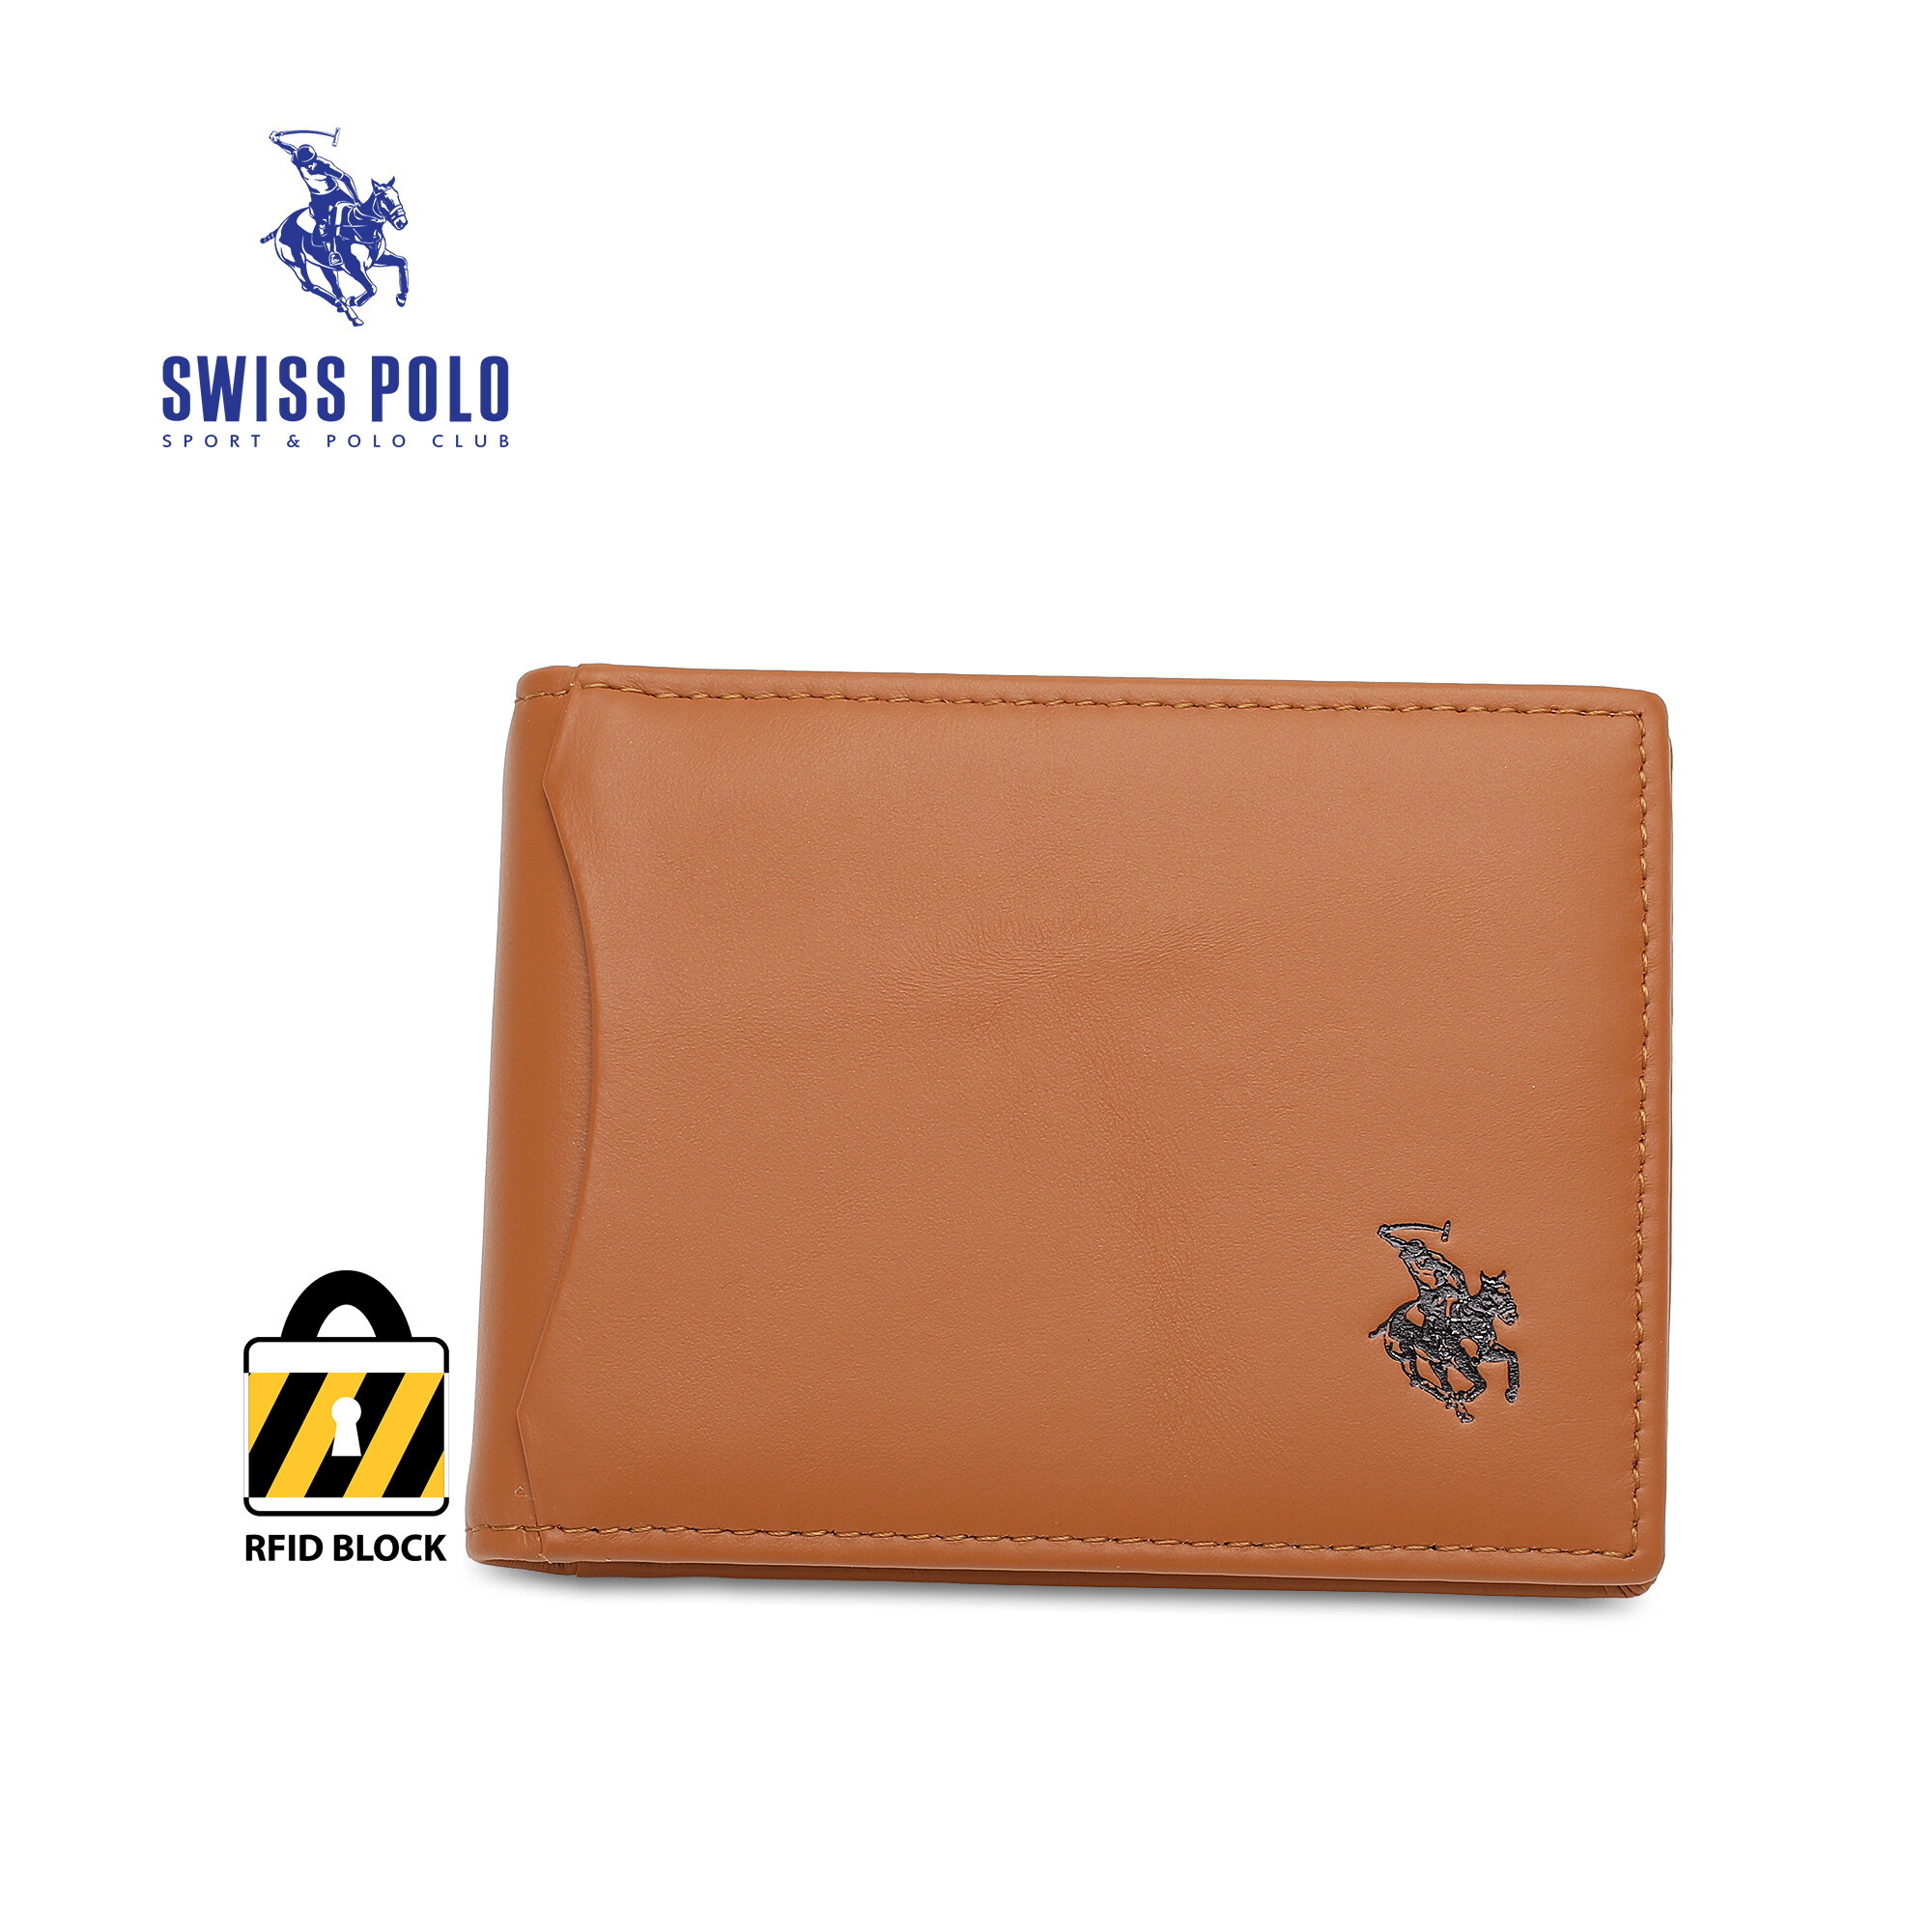 SWISS POLO Genuine Leather RFID Money Clip/Card Holder SW 162-1 BROWN